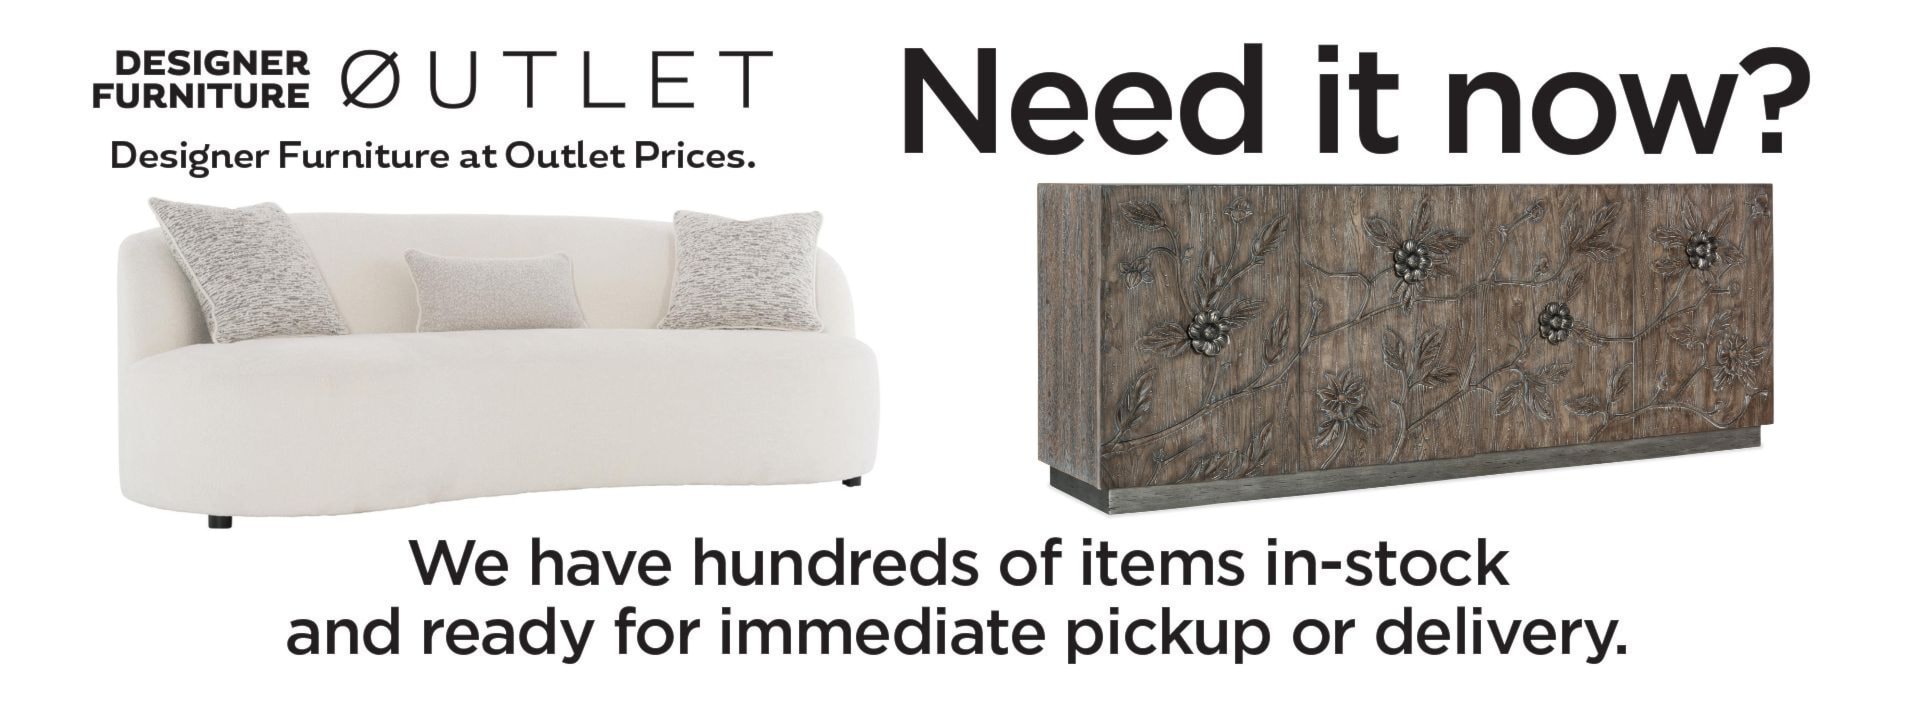 Designer Furniture Outle t- items available now